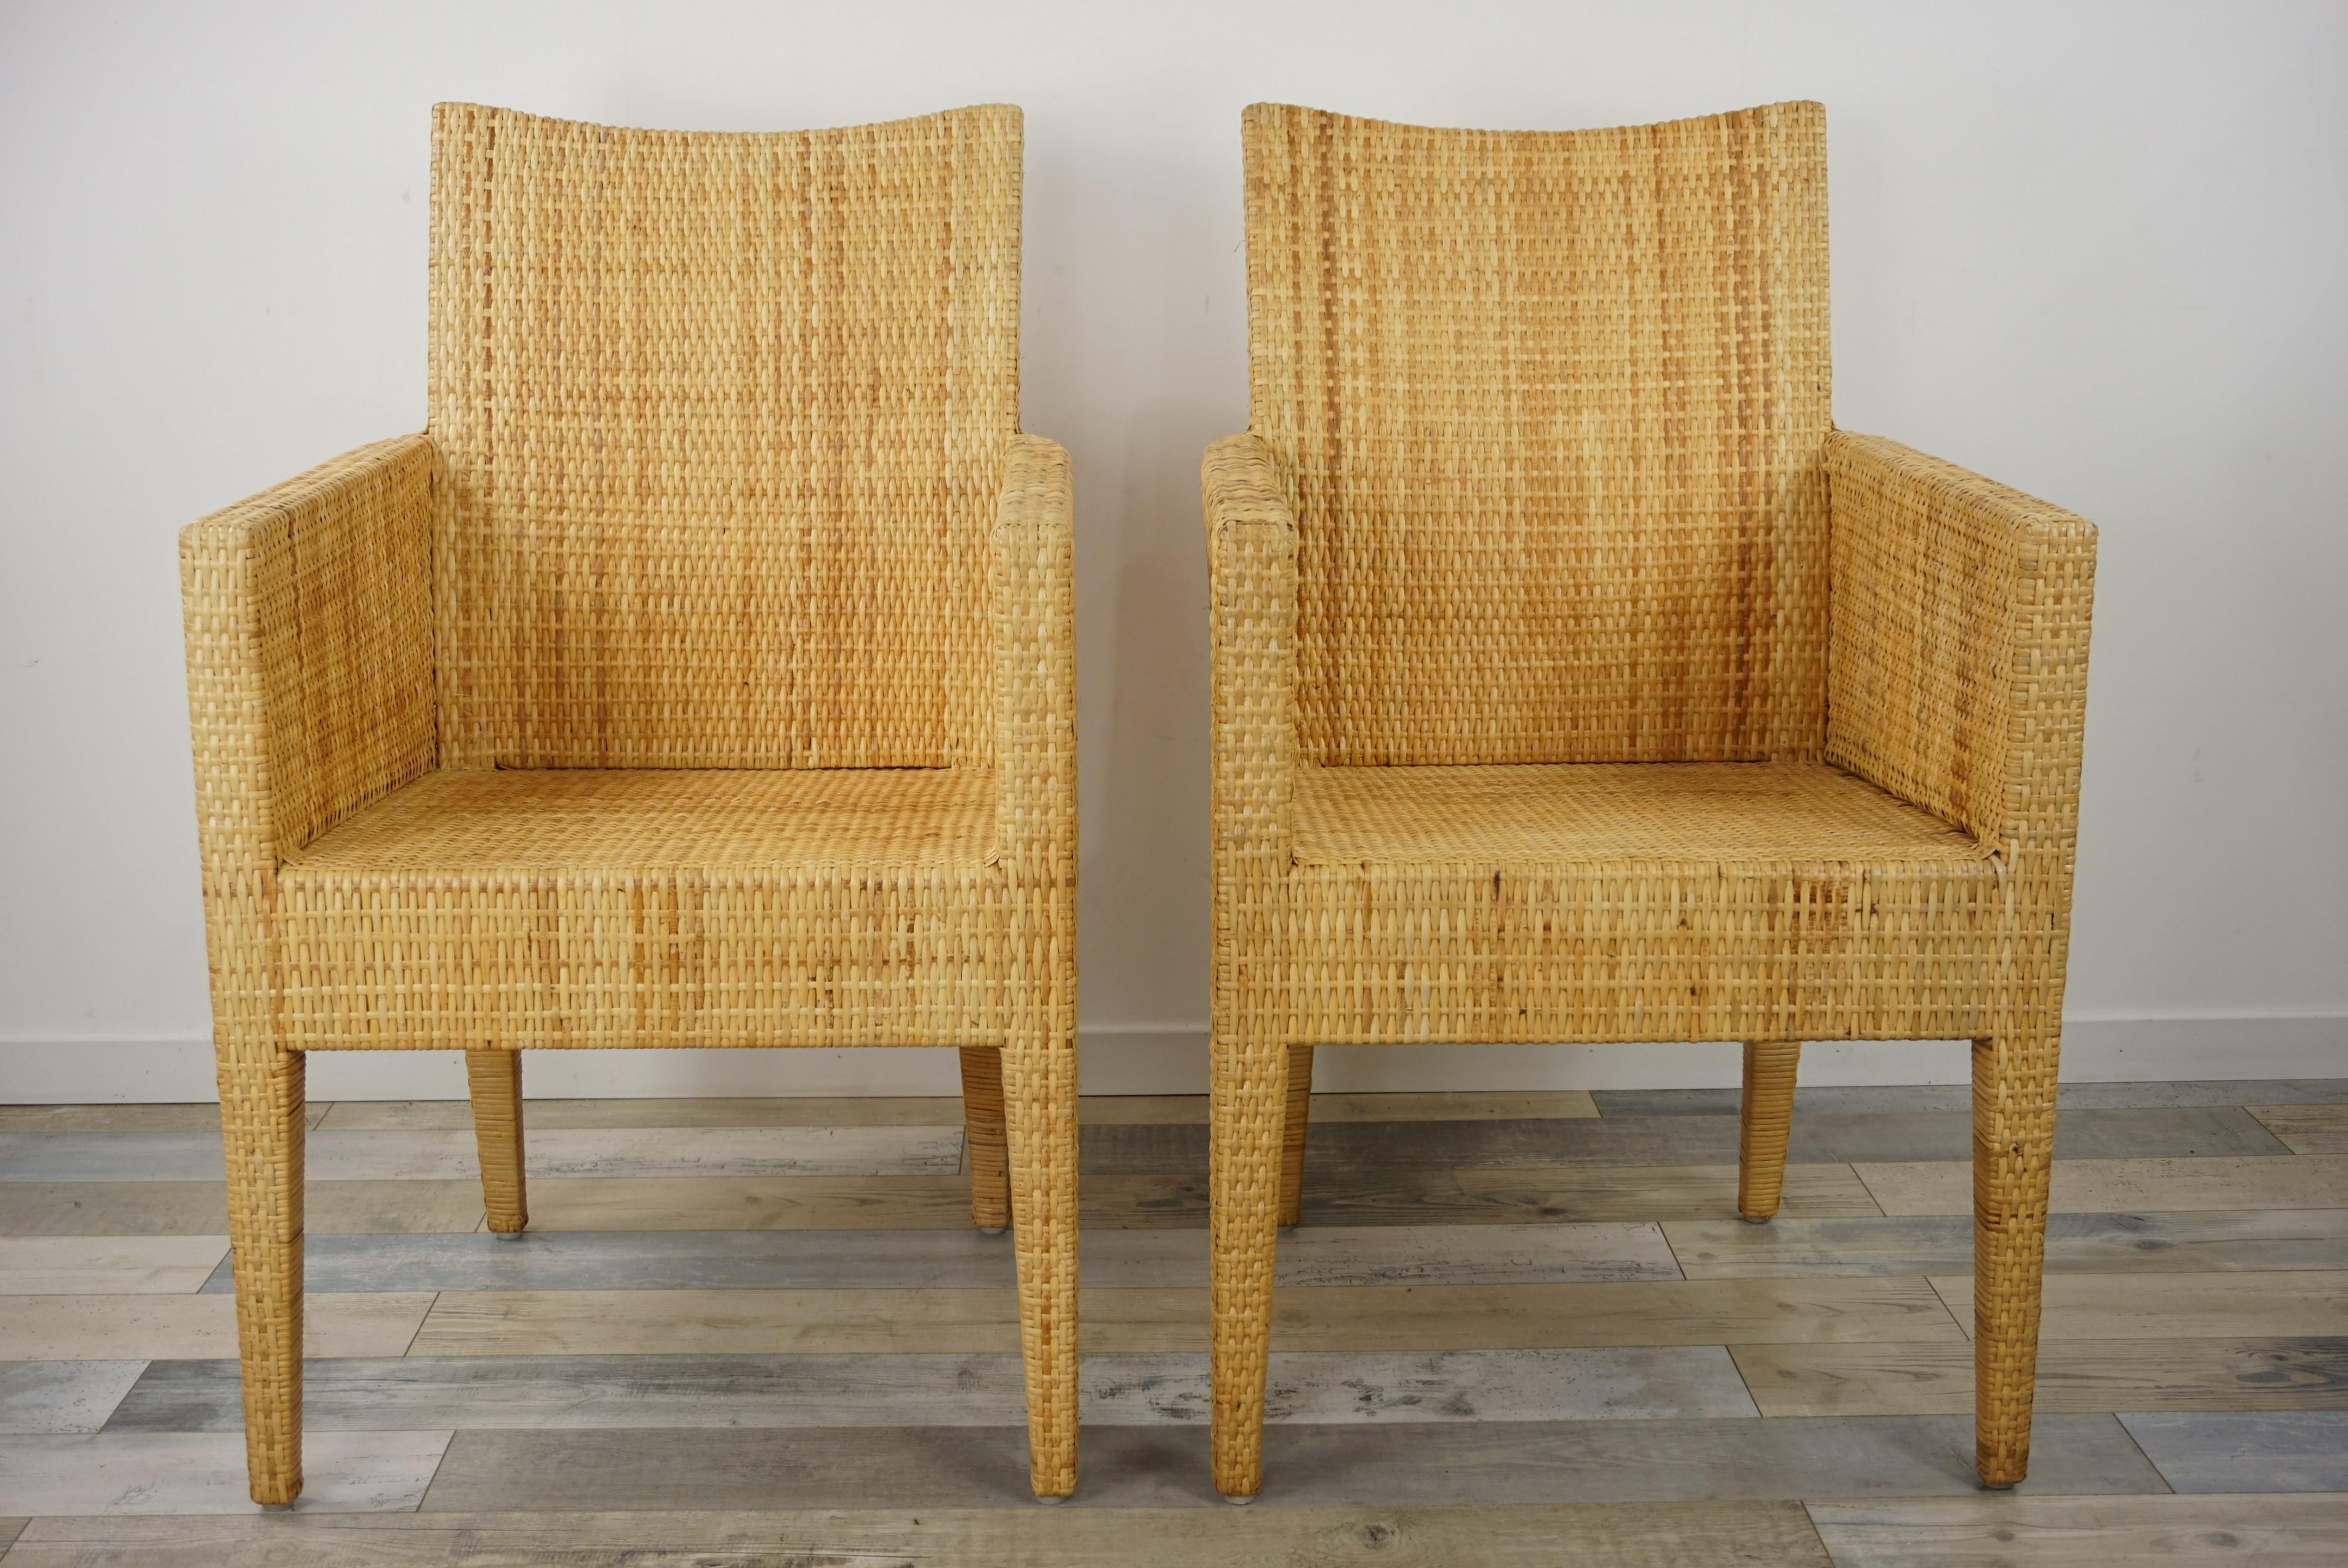 Sculptural bridge armchairs with a structure in solid wood covered with a braiding of natural rattan blade.